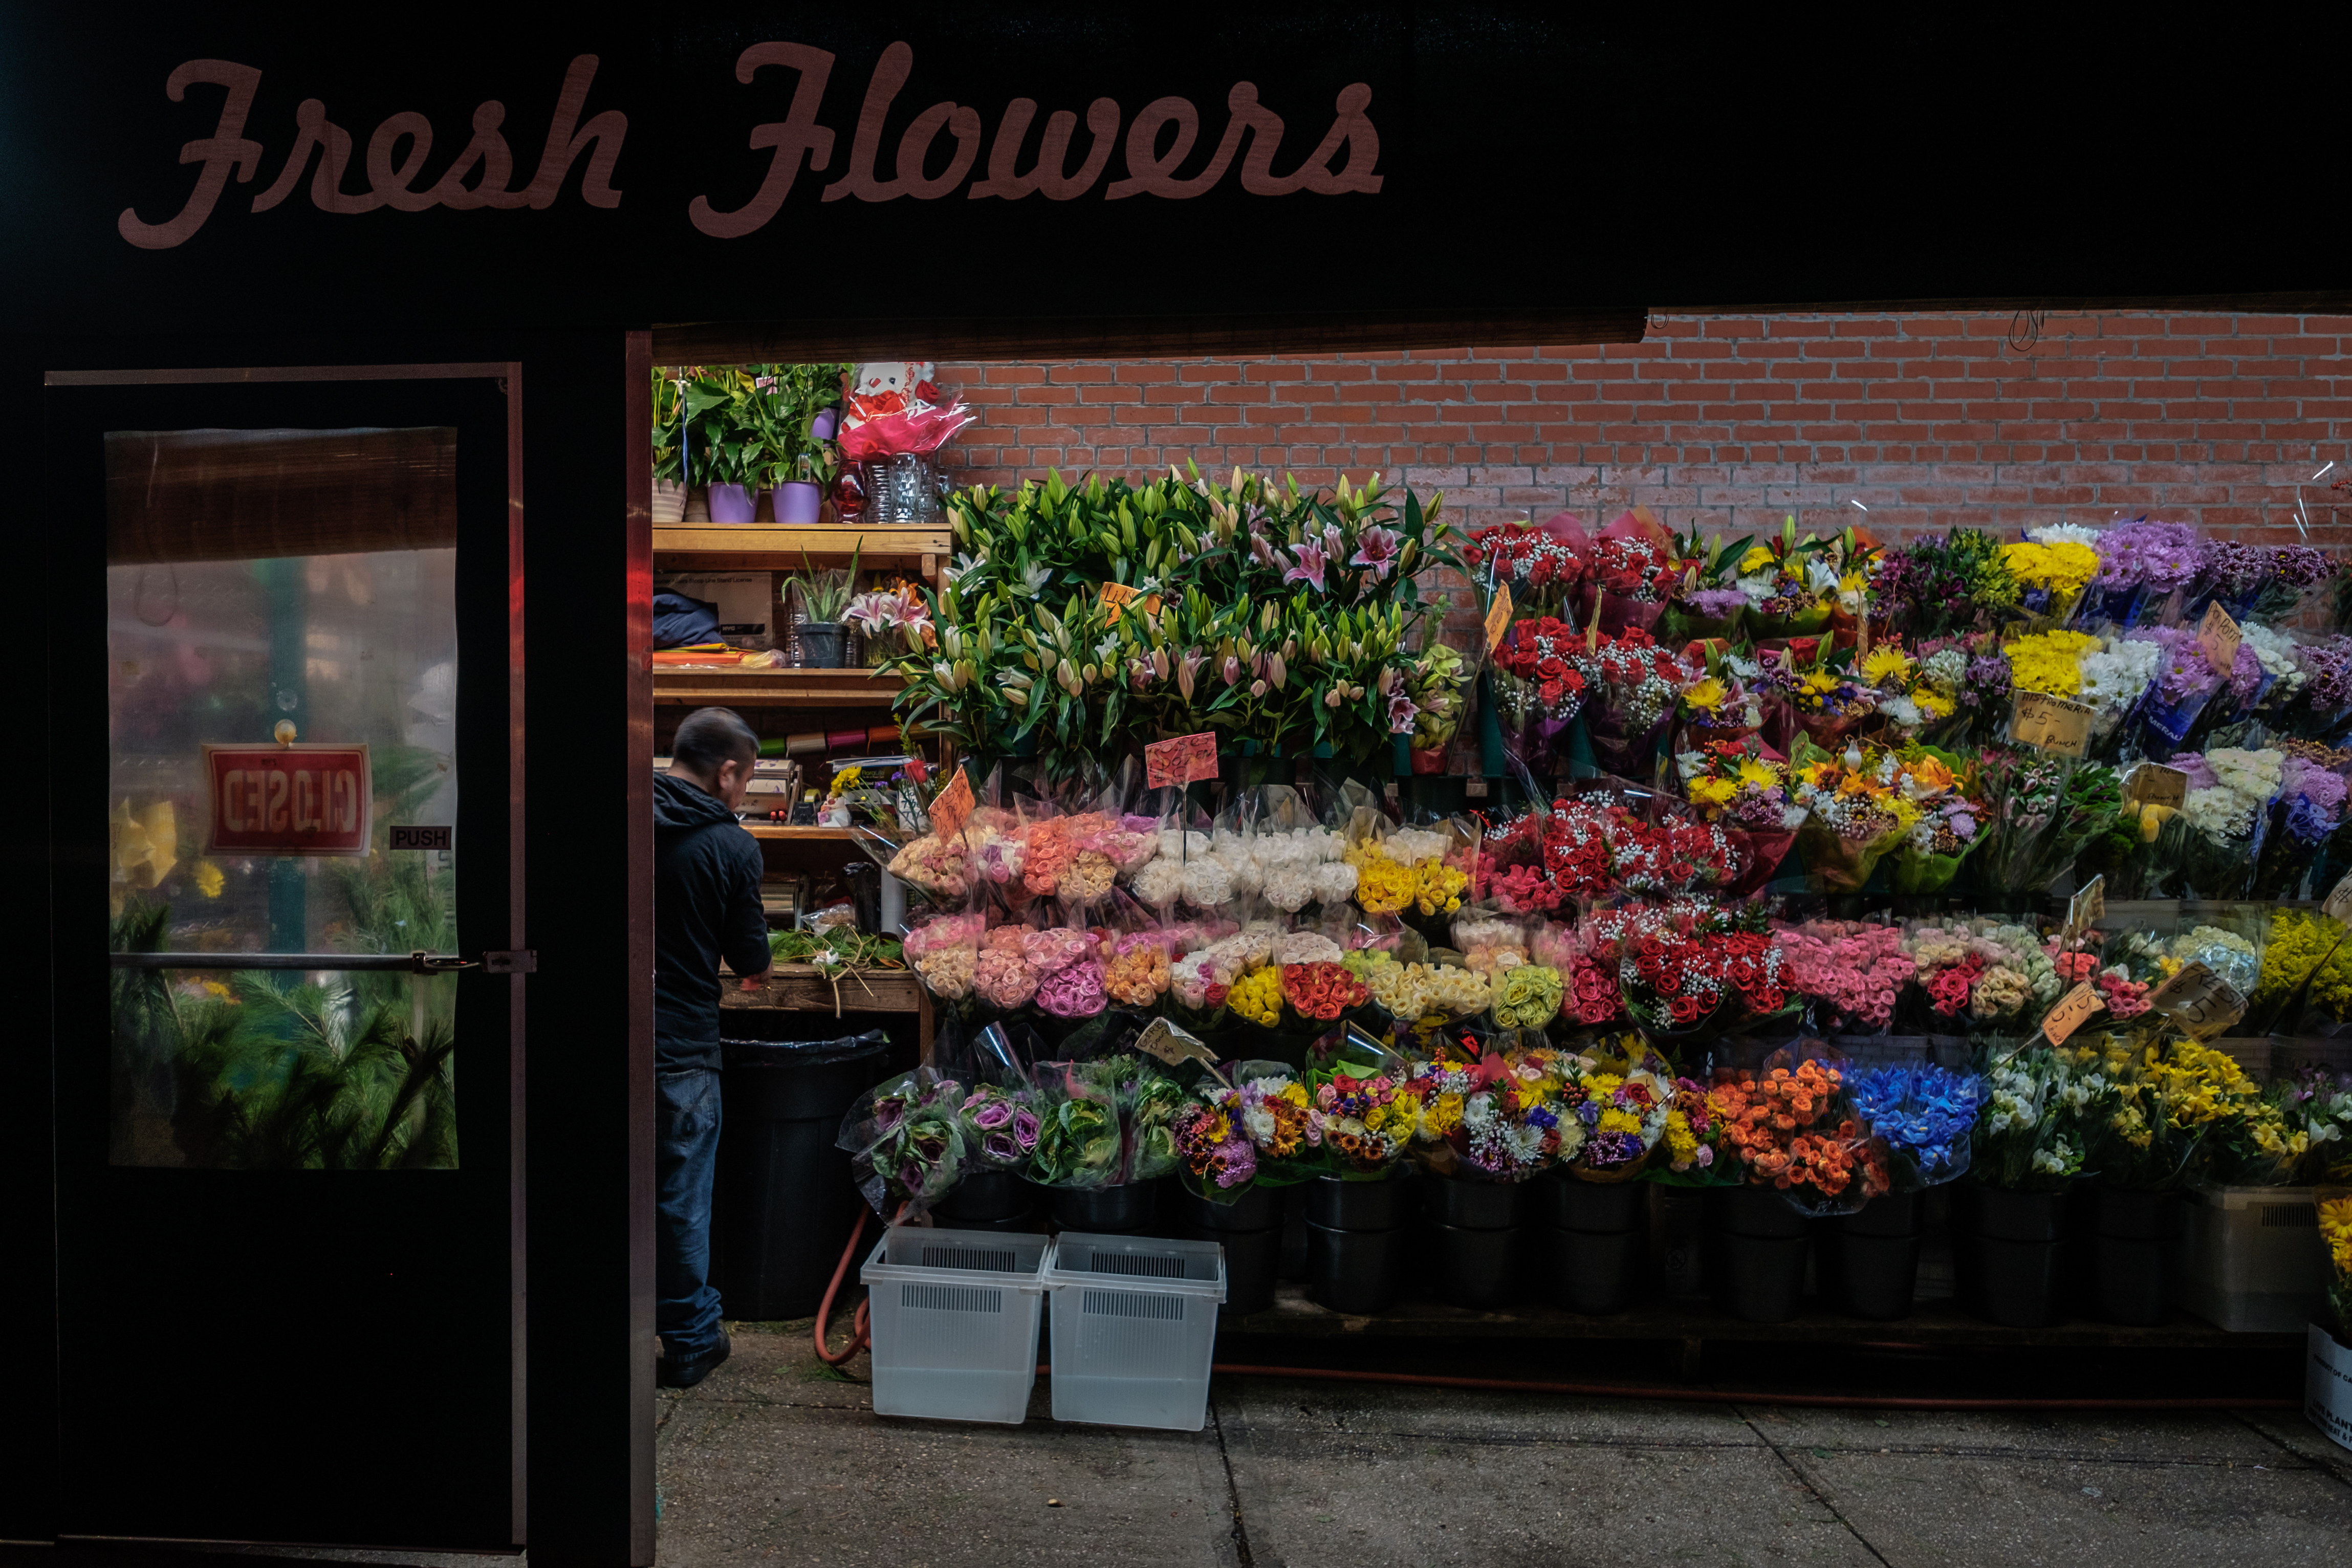 cobble-hill-flower-stand-night-color-photography